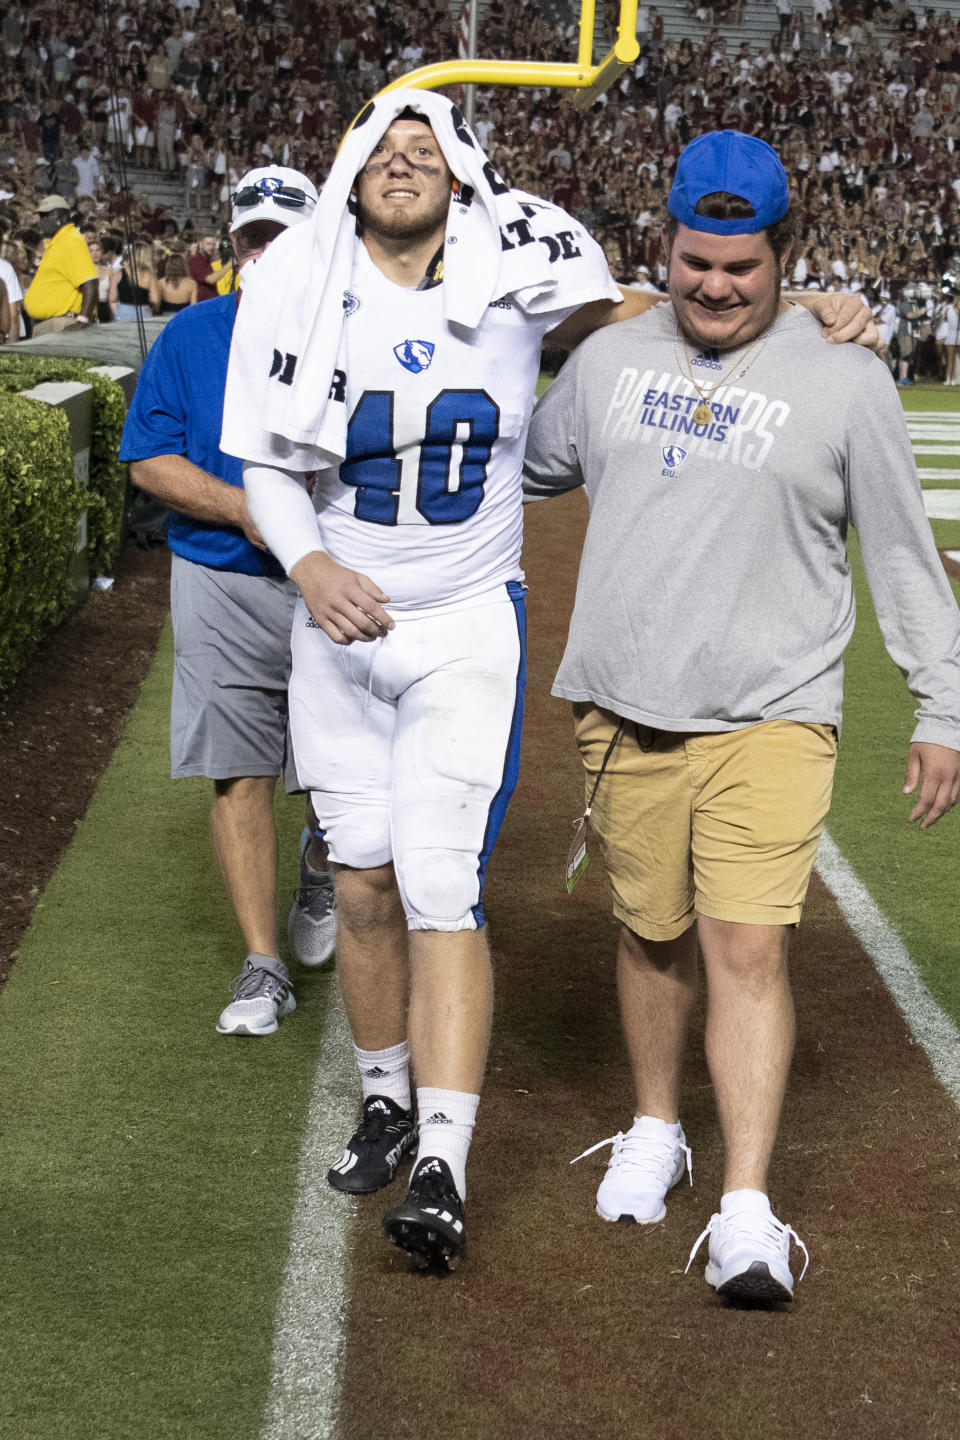 Eastern Illinois linebacker Phoenix Porter (40) is helped to the locker room during the first half of an NCAA college football game against South Carolina, Saturday, Sept. 4, 2021, in Columbia, S.C. (AP Photo/Hakim Wright Sr.)